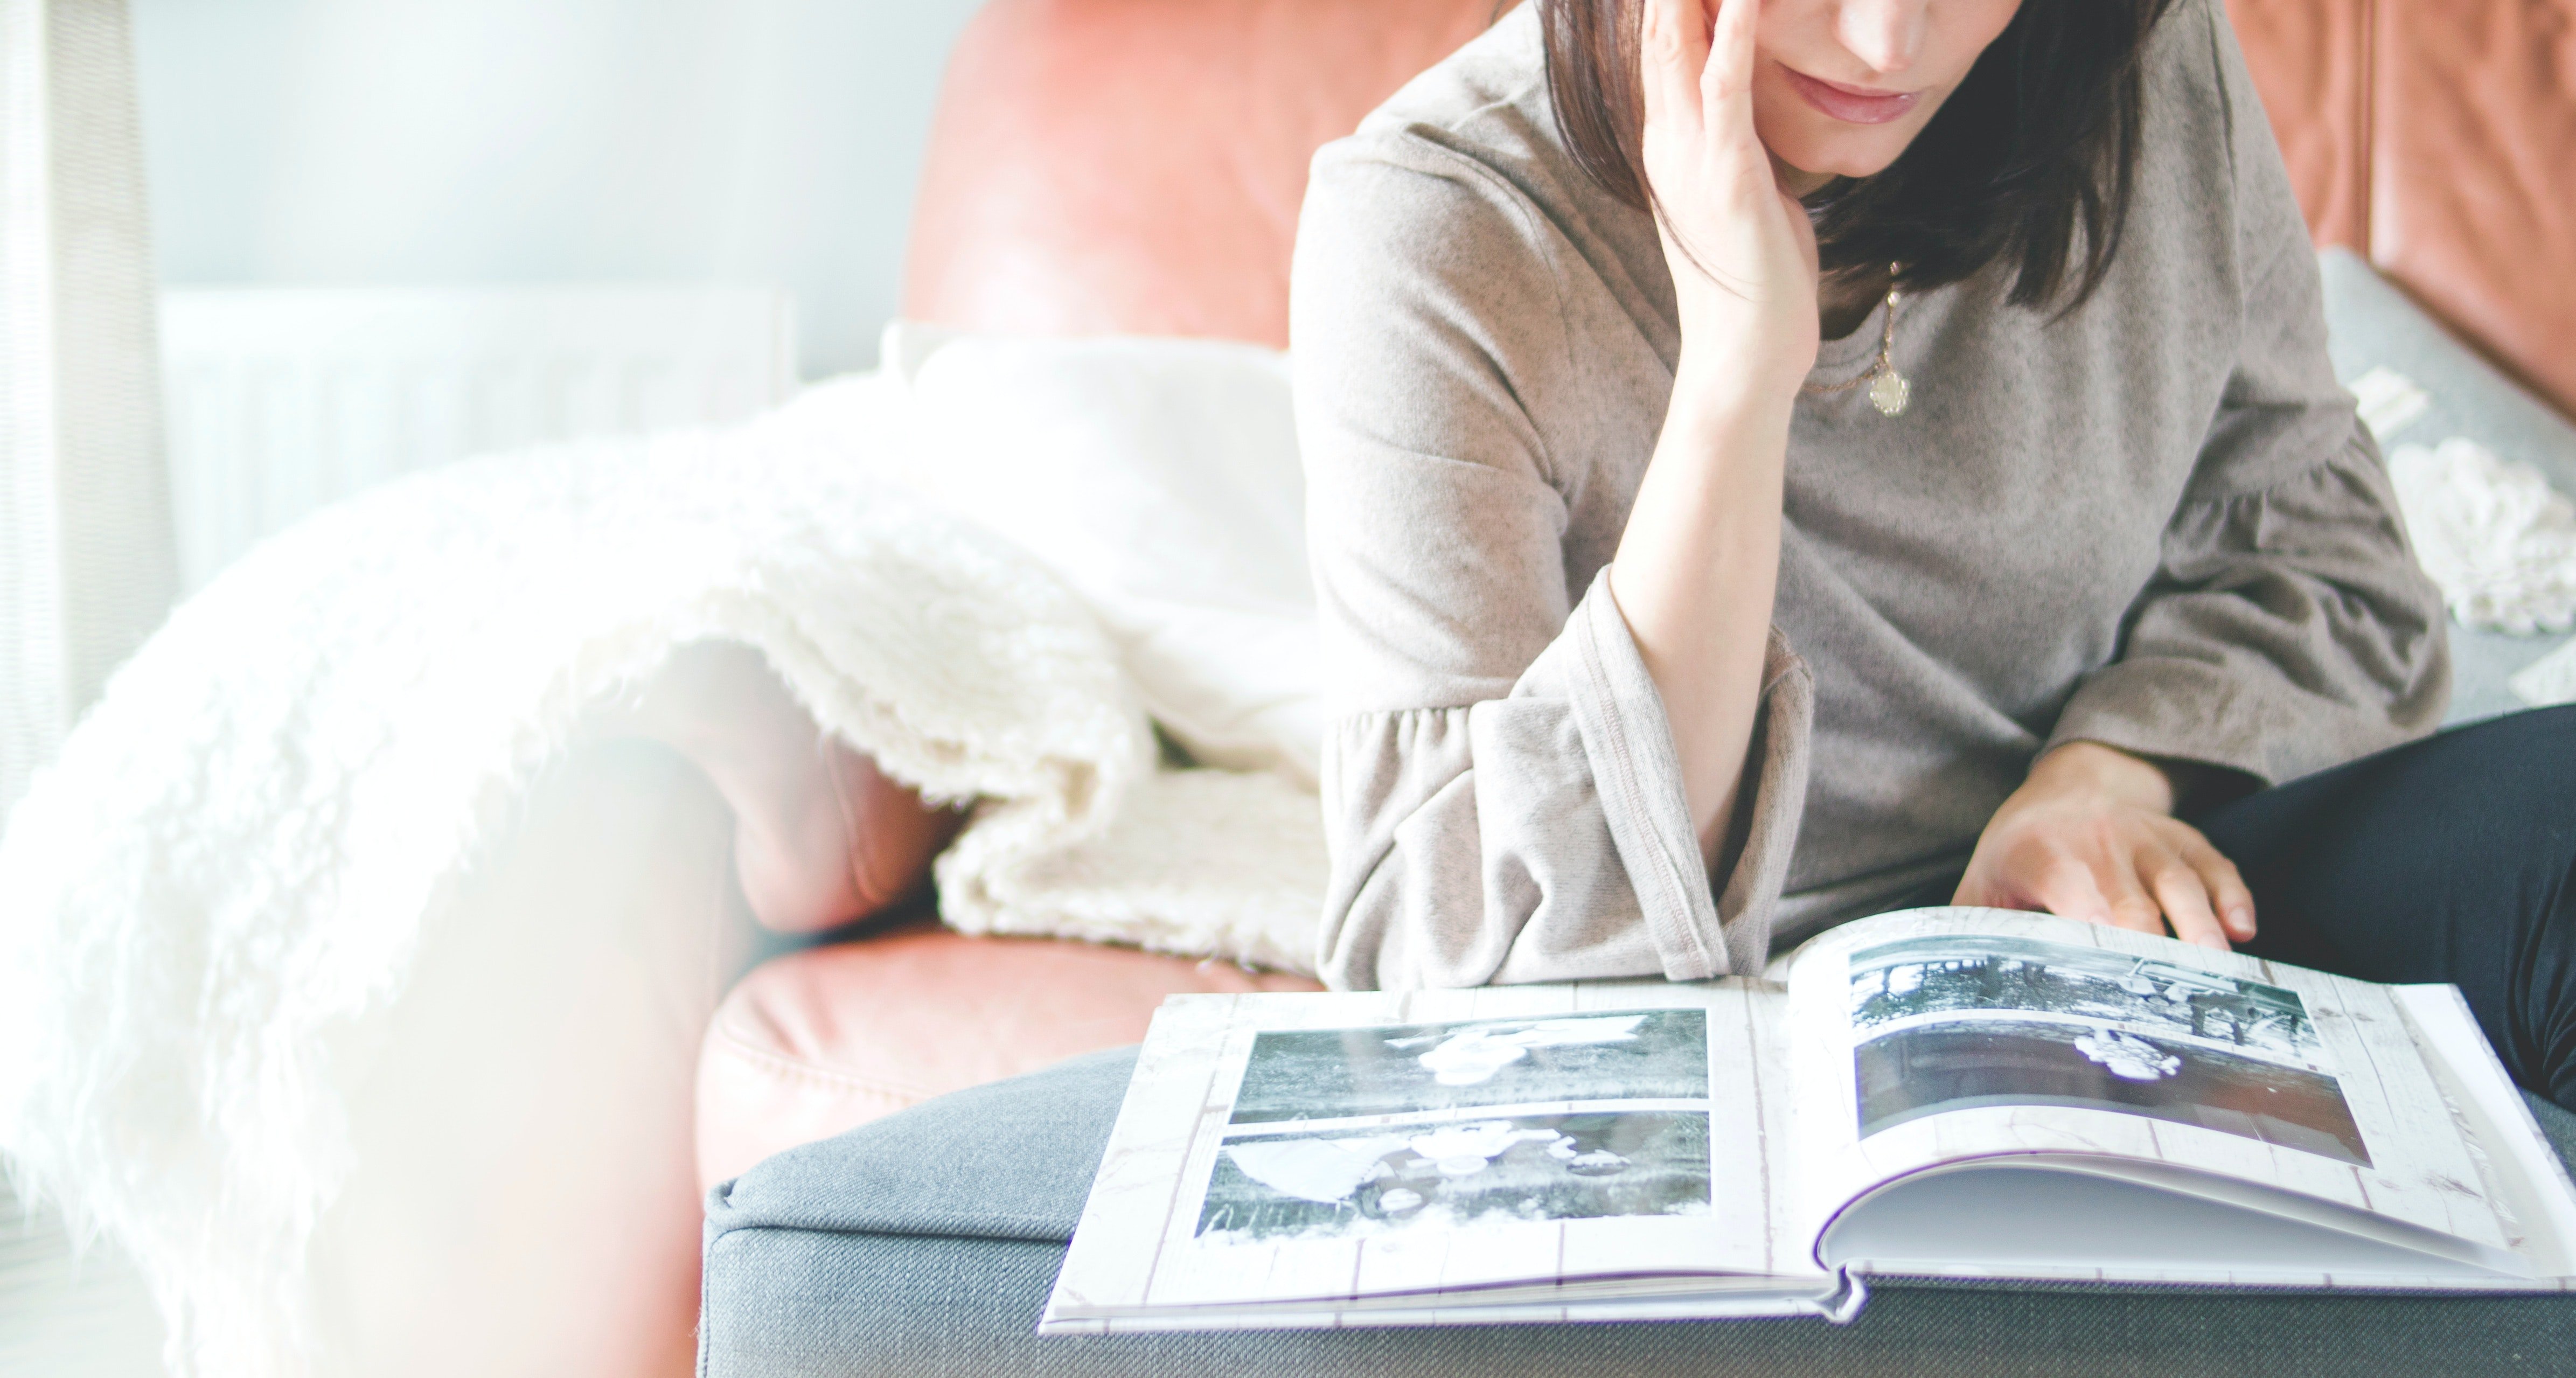 Samantha browsed through the photo album that her dad handed her. | Source: Pexels